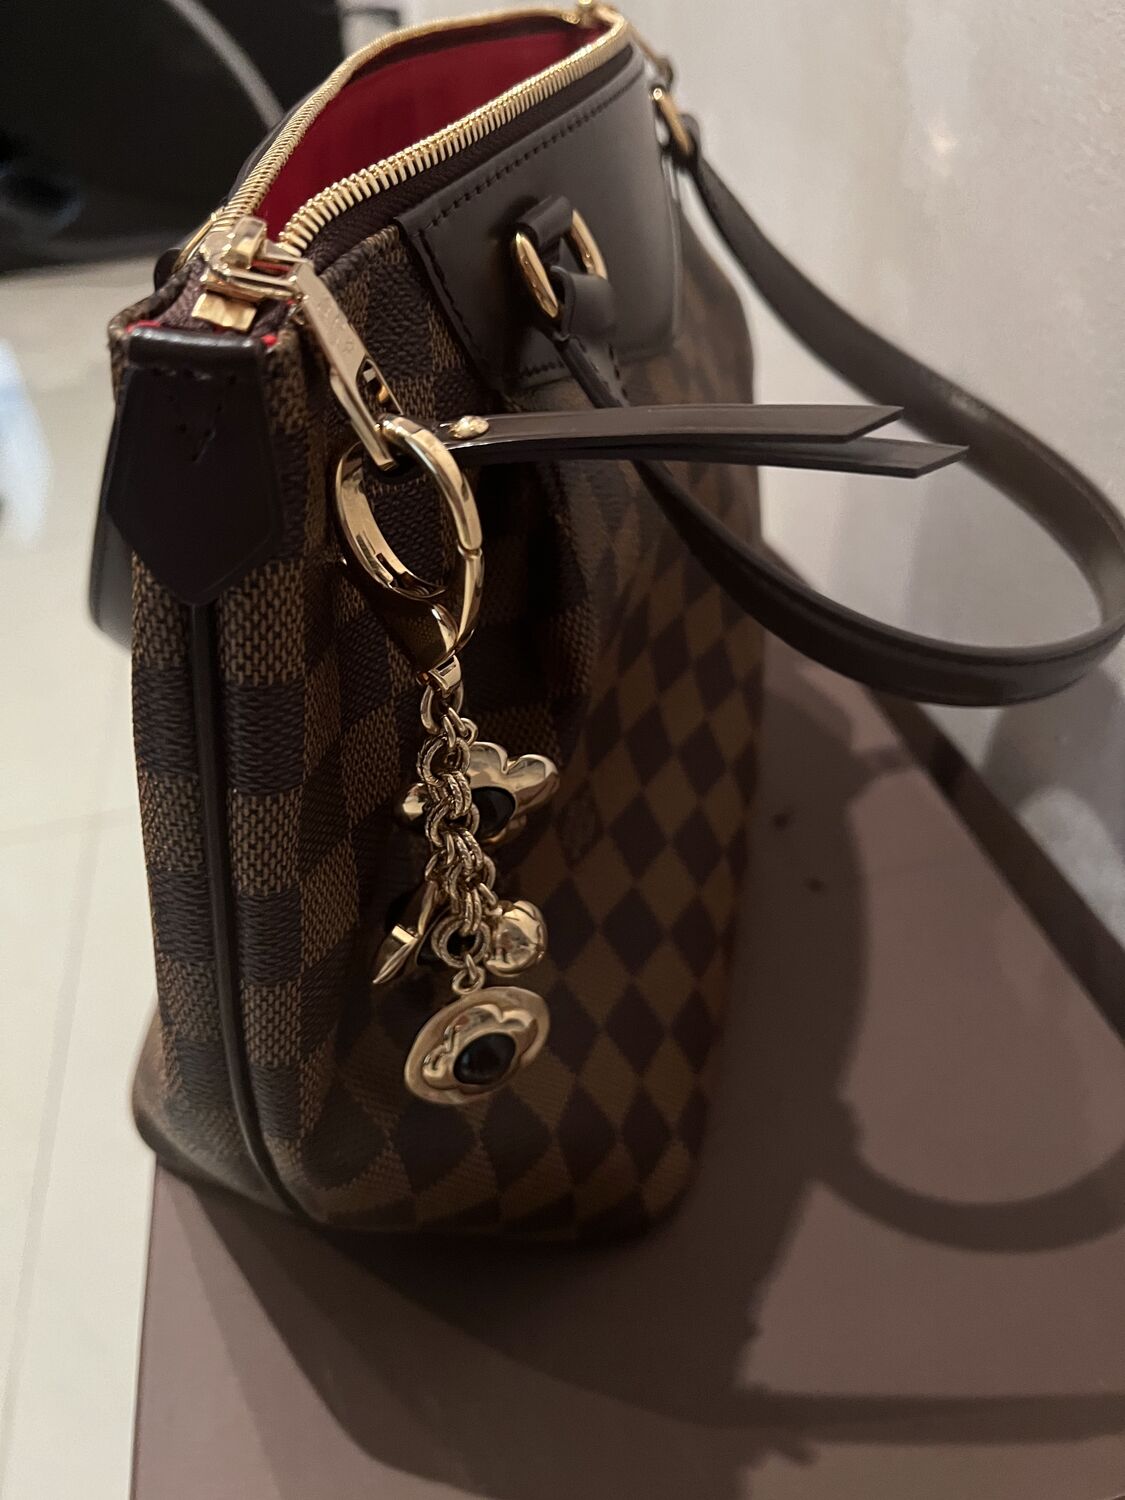 Leather handbag Louis Vuitton - One size, buy pre-owned at 3600 RON